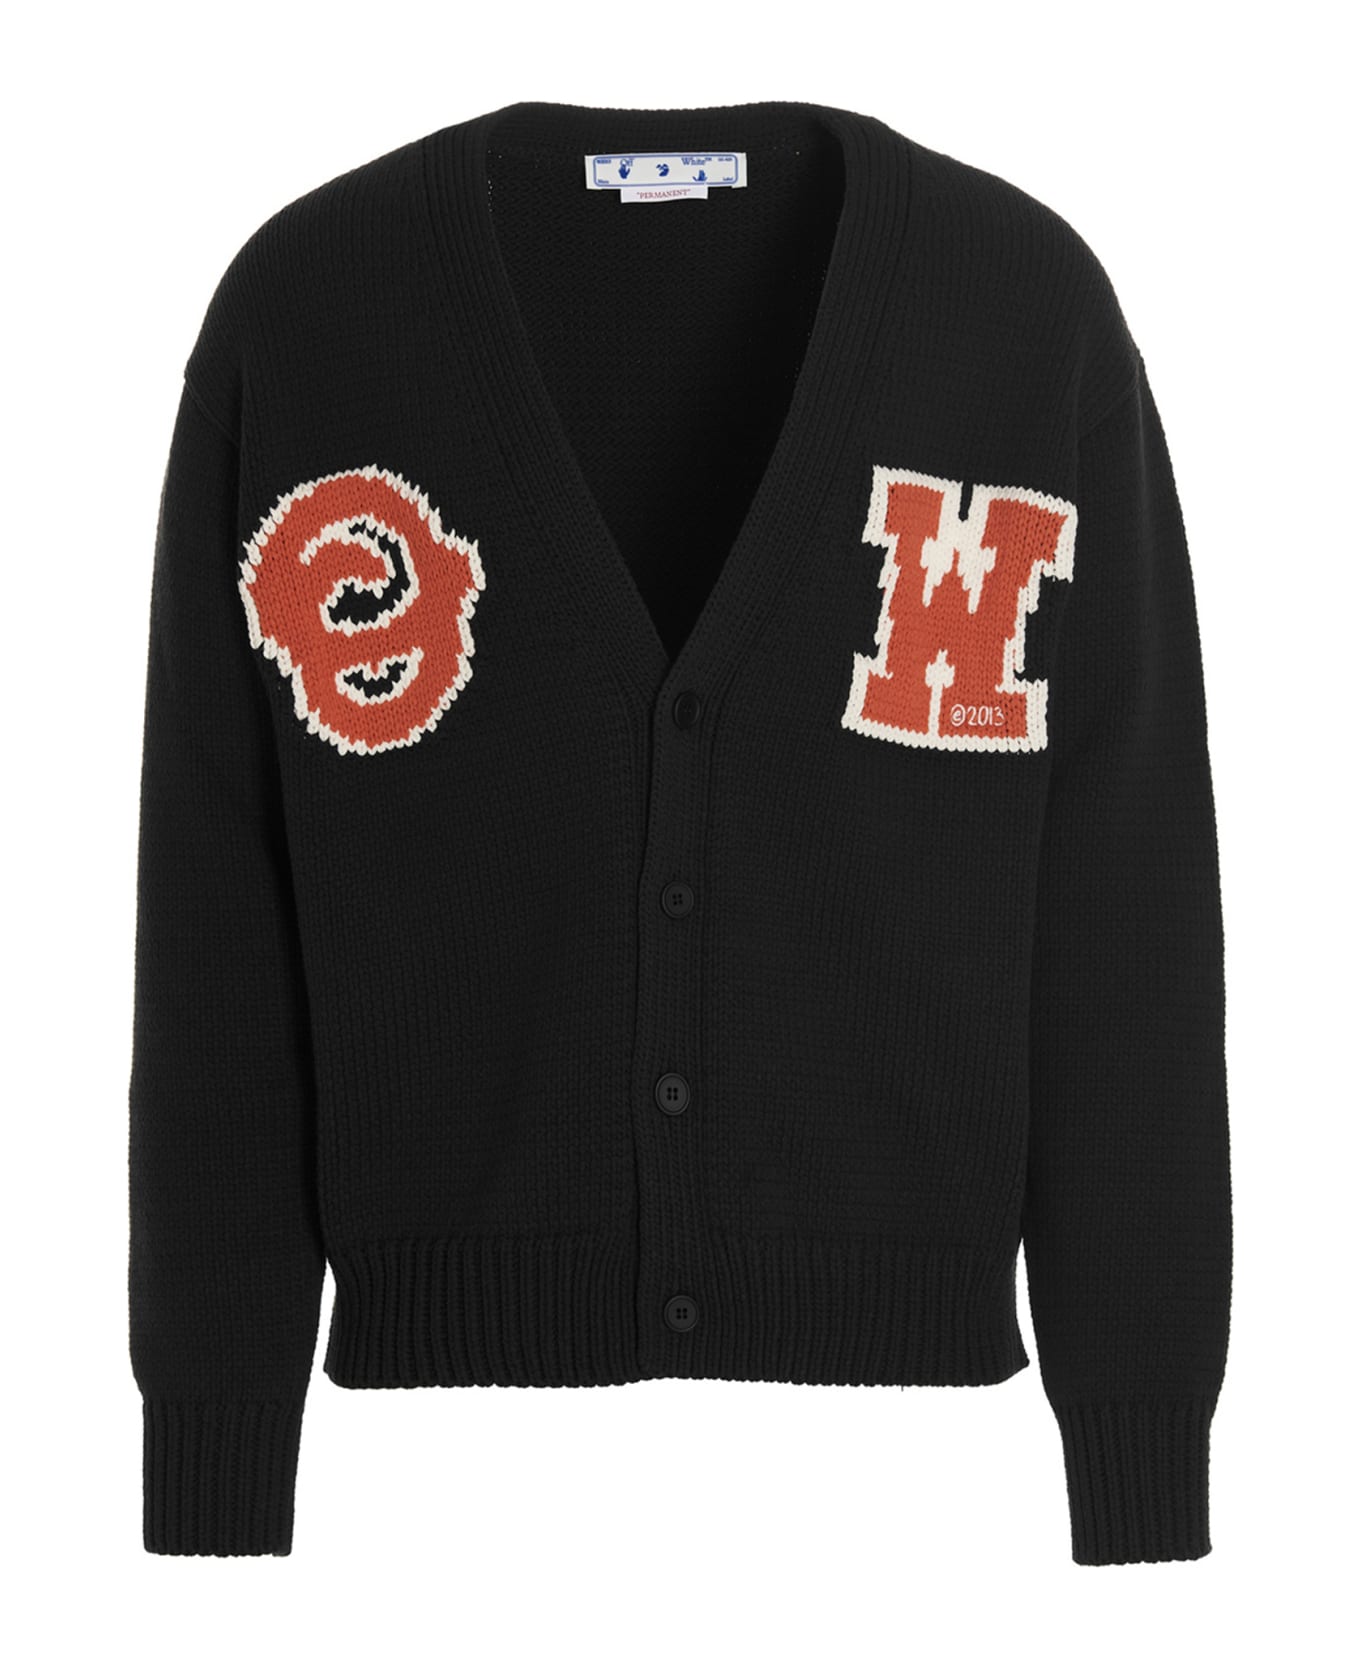 Off-White 'ow Patch Cardigan - Black